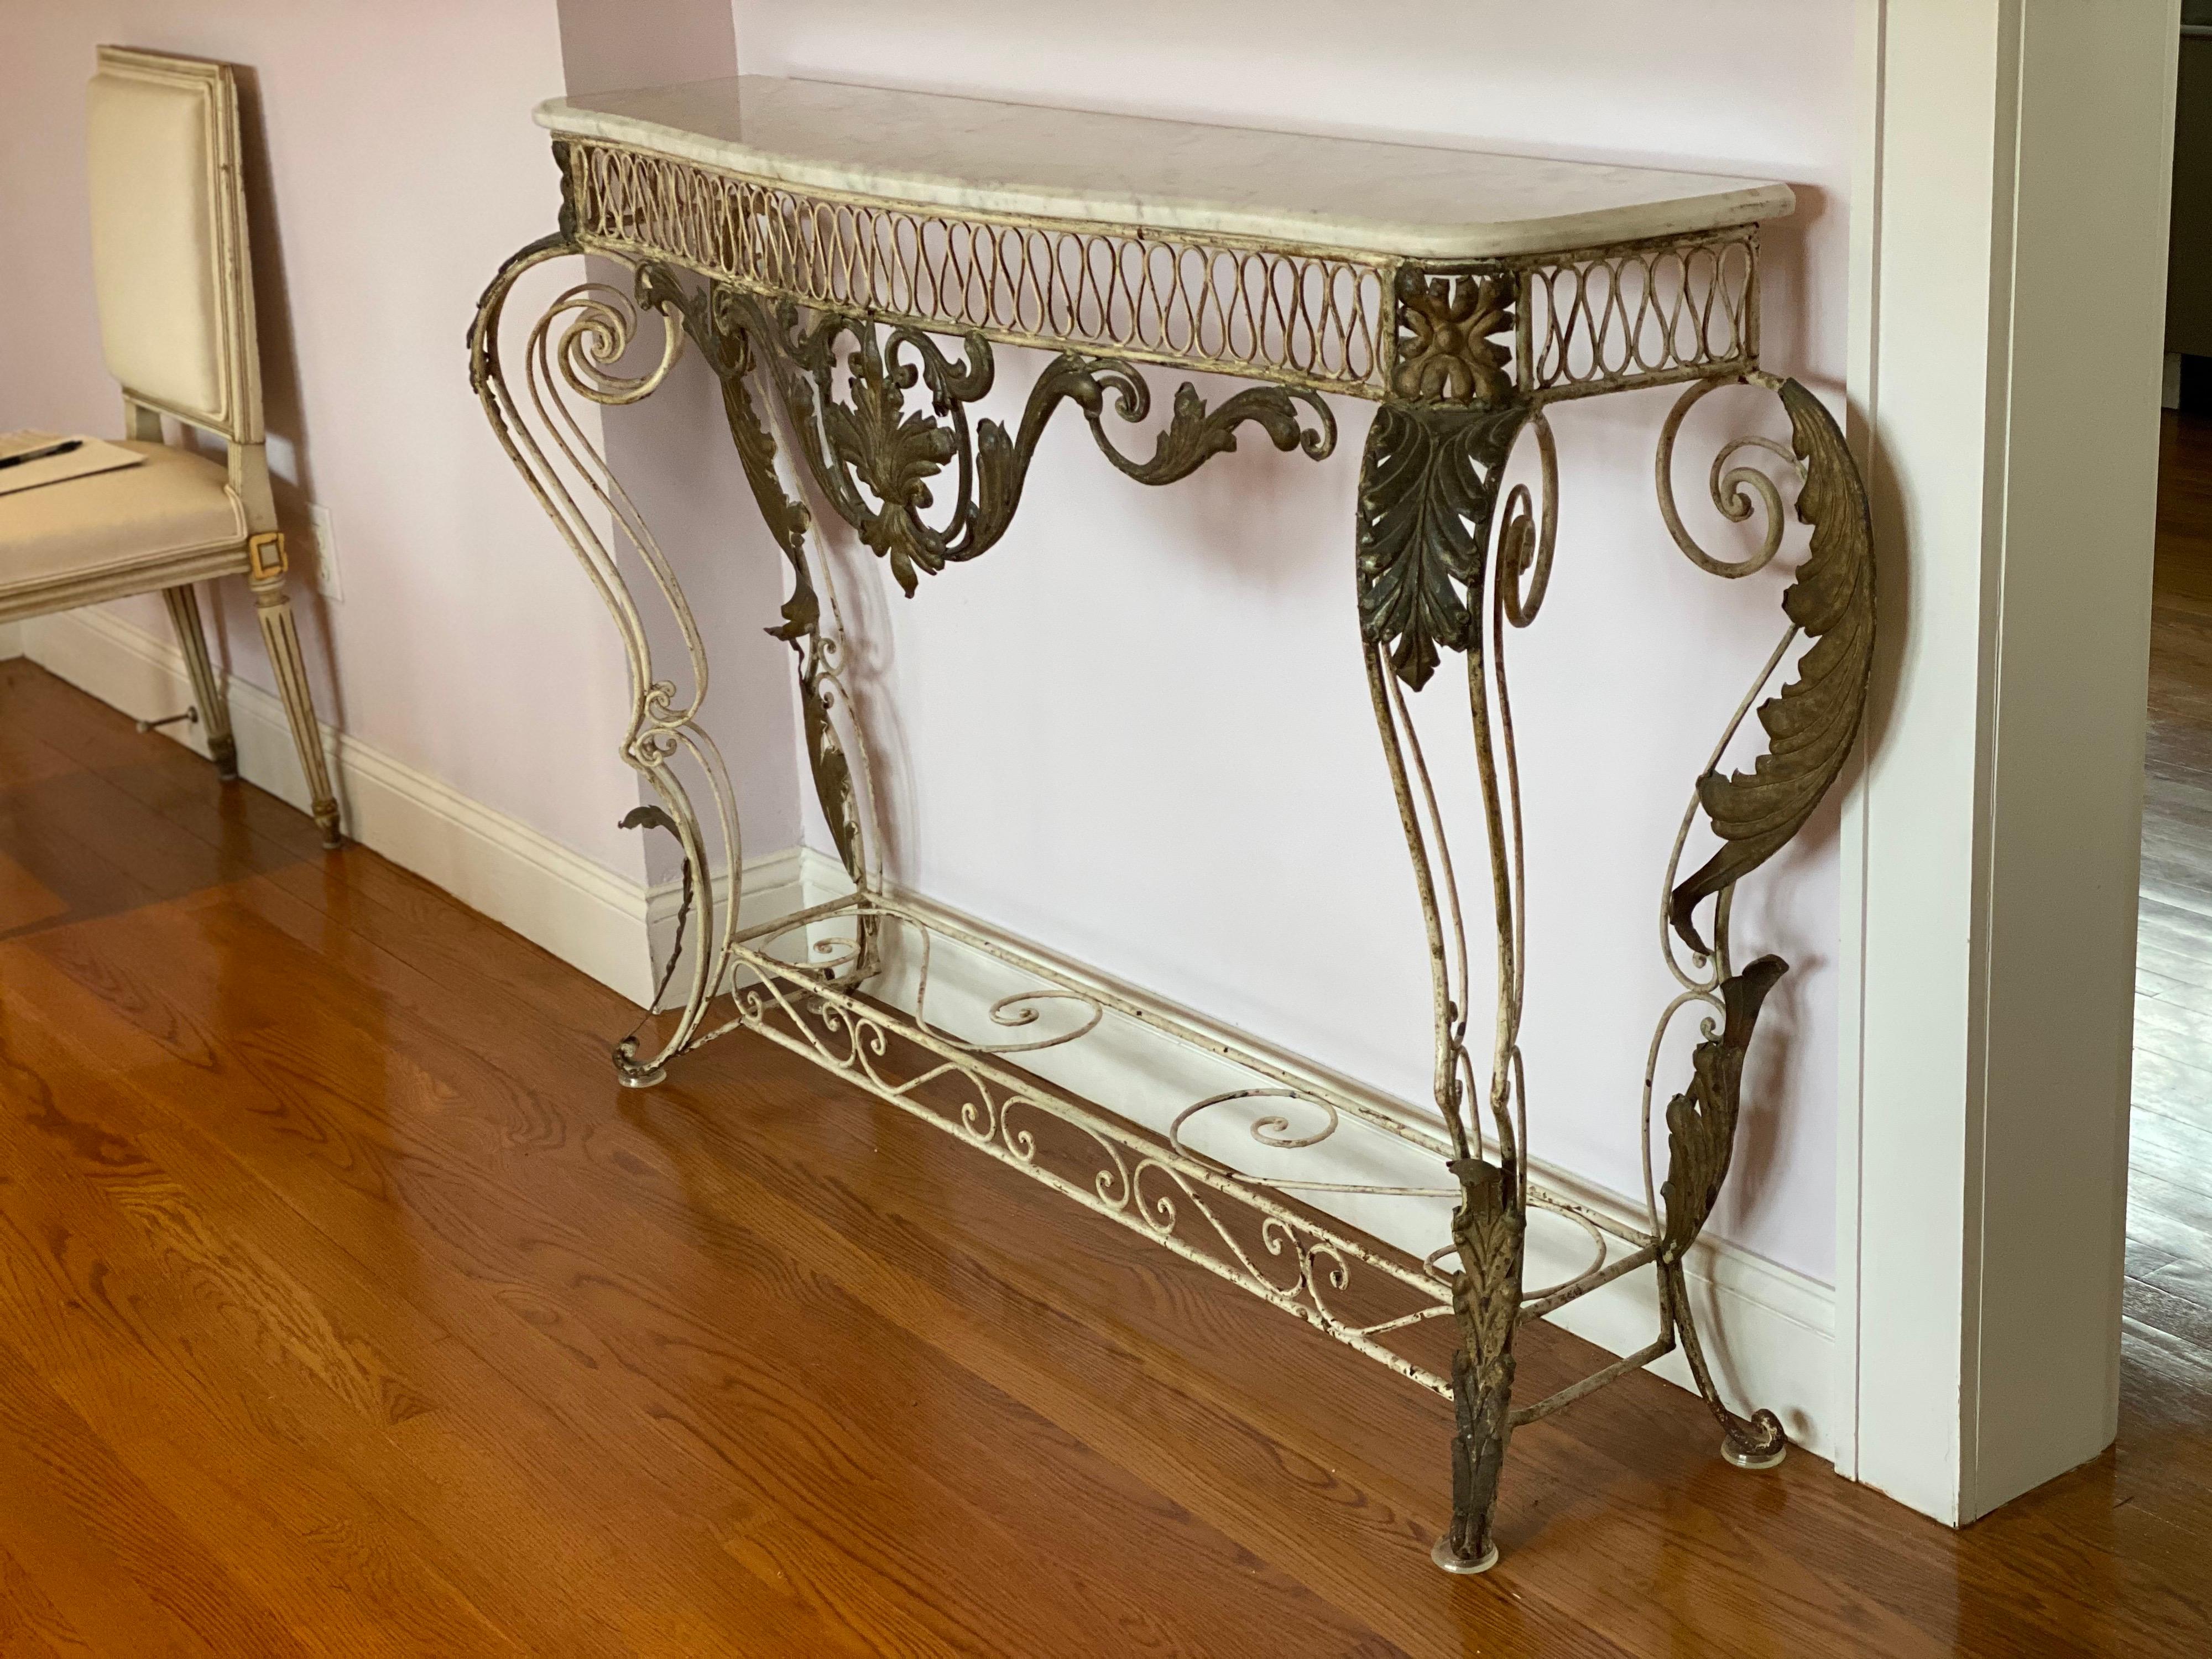 French iron & gilded Louis XV style white painted console with marble top
Elaborate scrolling ironwork with gilded acanthus leaves and Carrara marble top.
Measures: 60